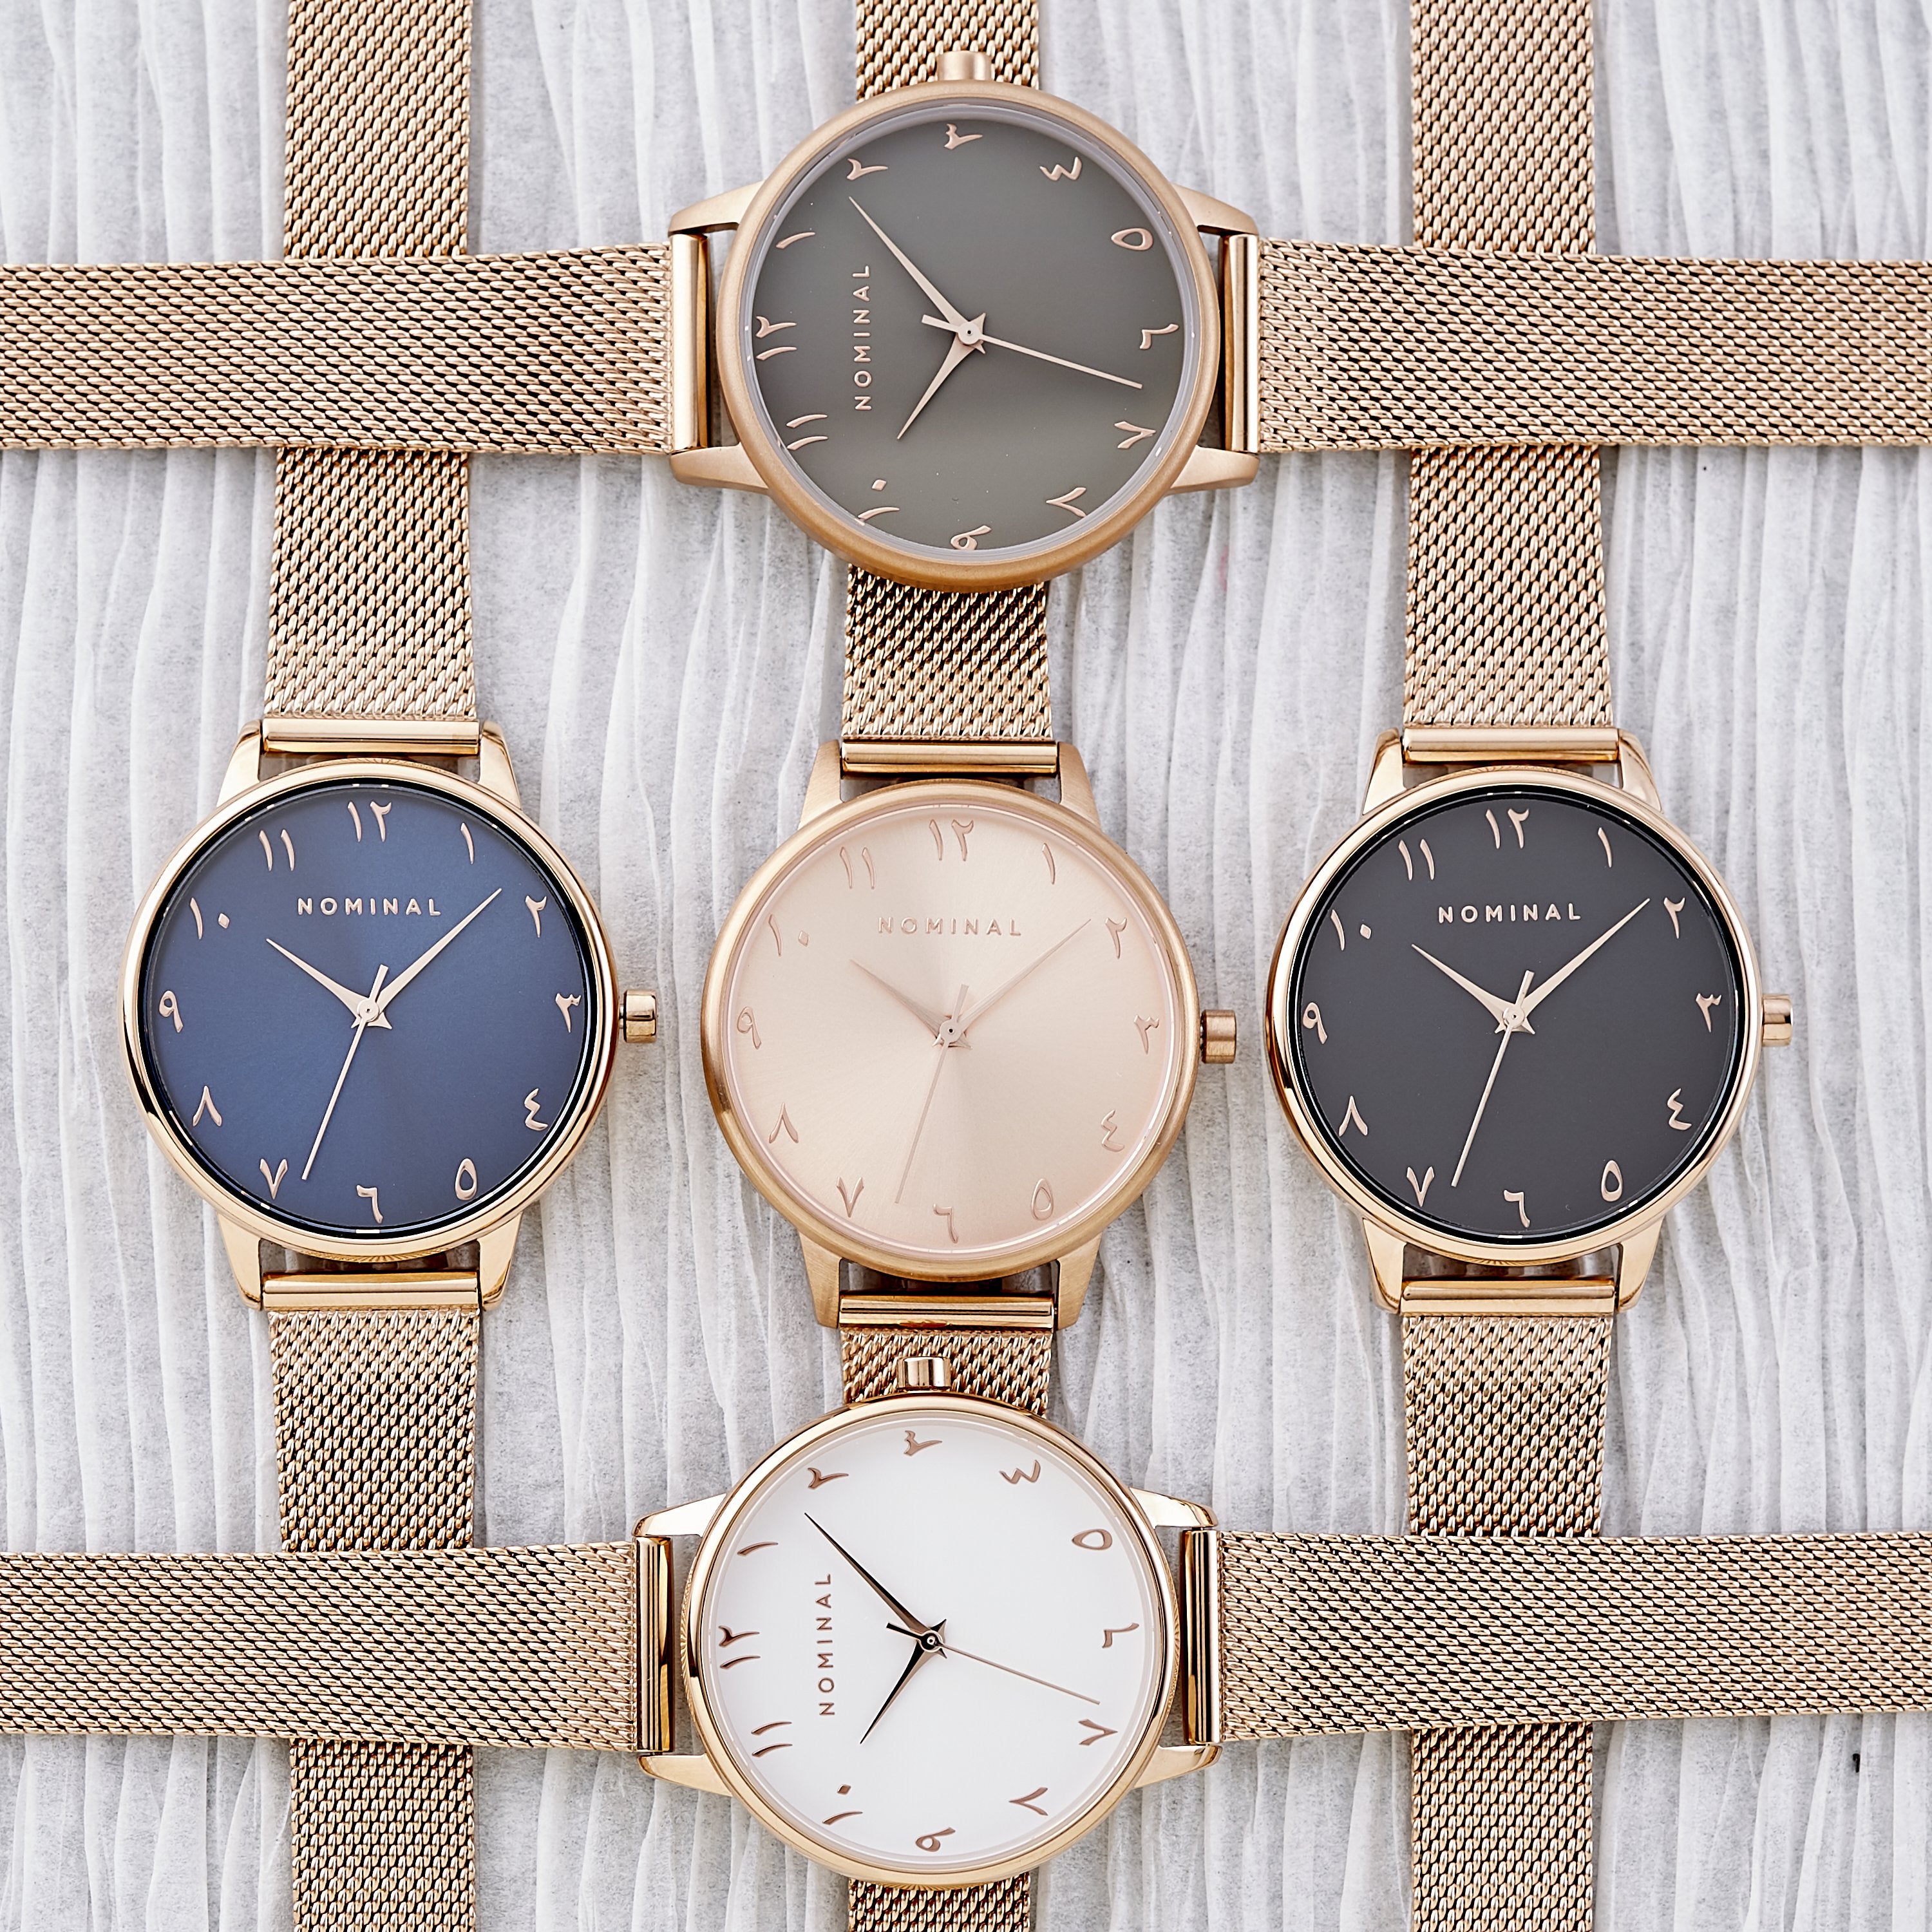 Watch Sizes & The Perfect Size For You